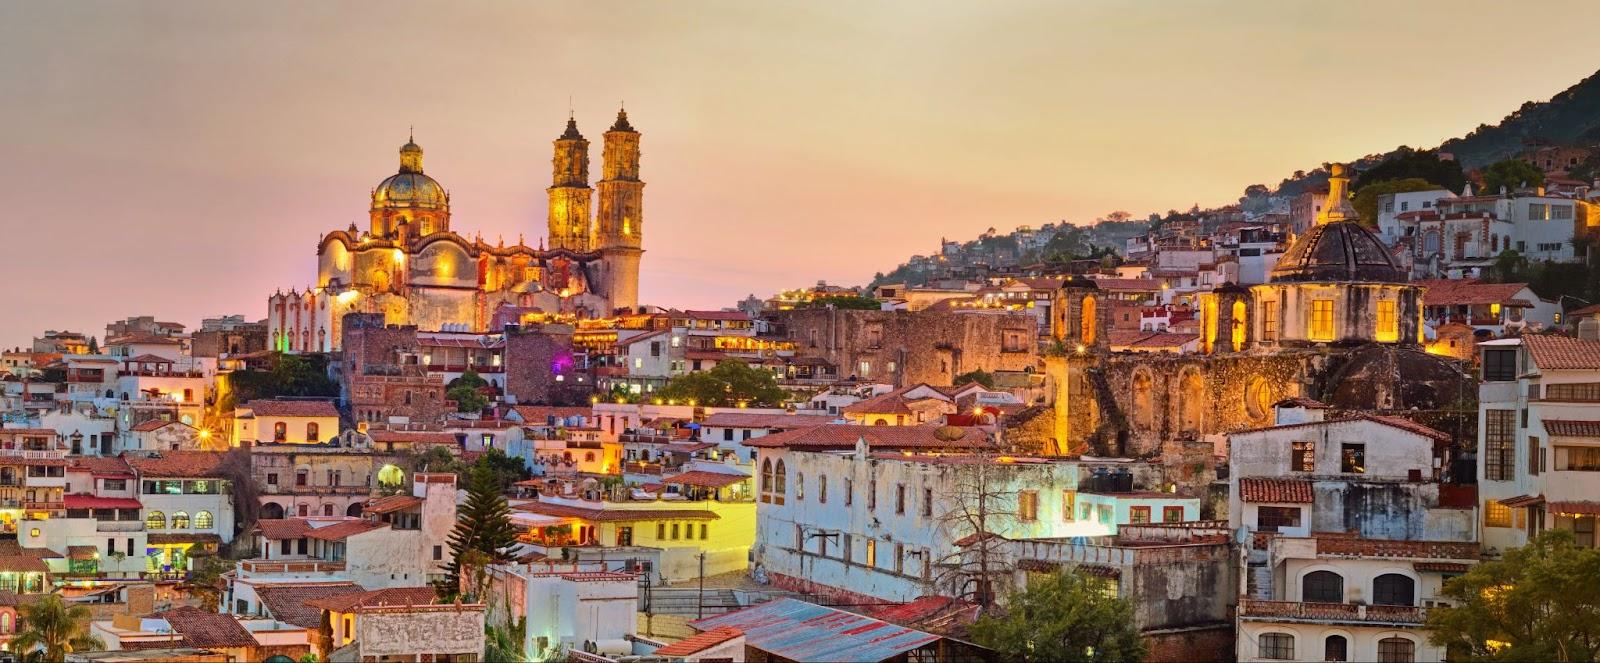 Panorama of Taxco city at sunset in Mexico